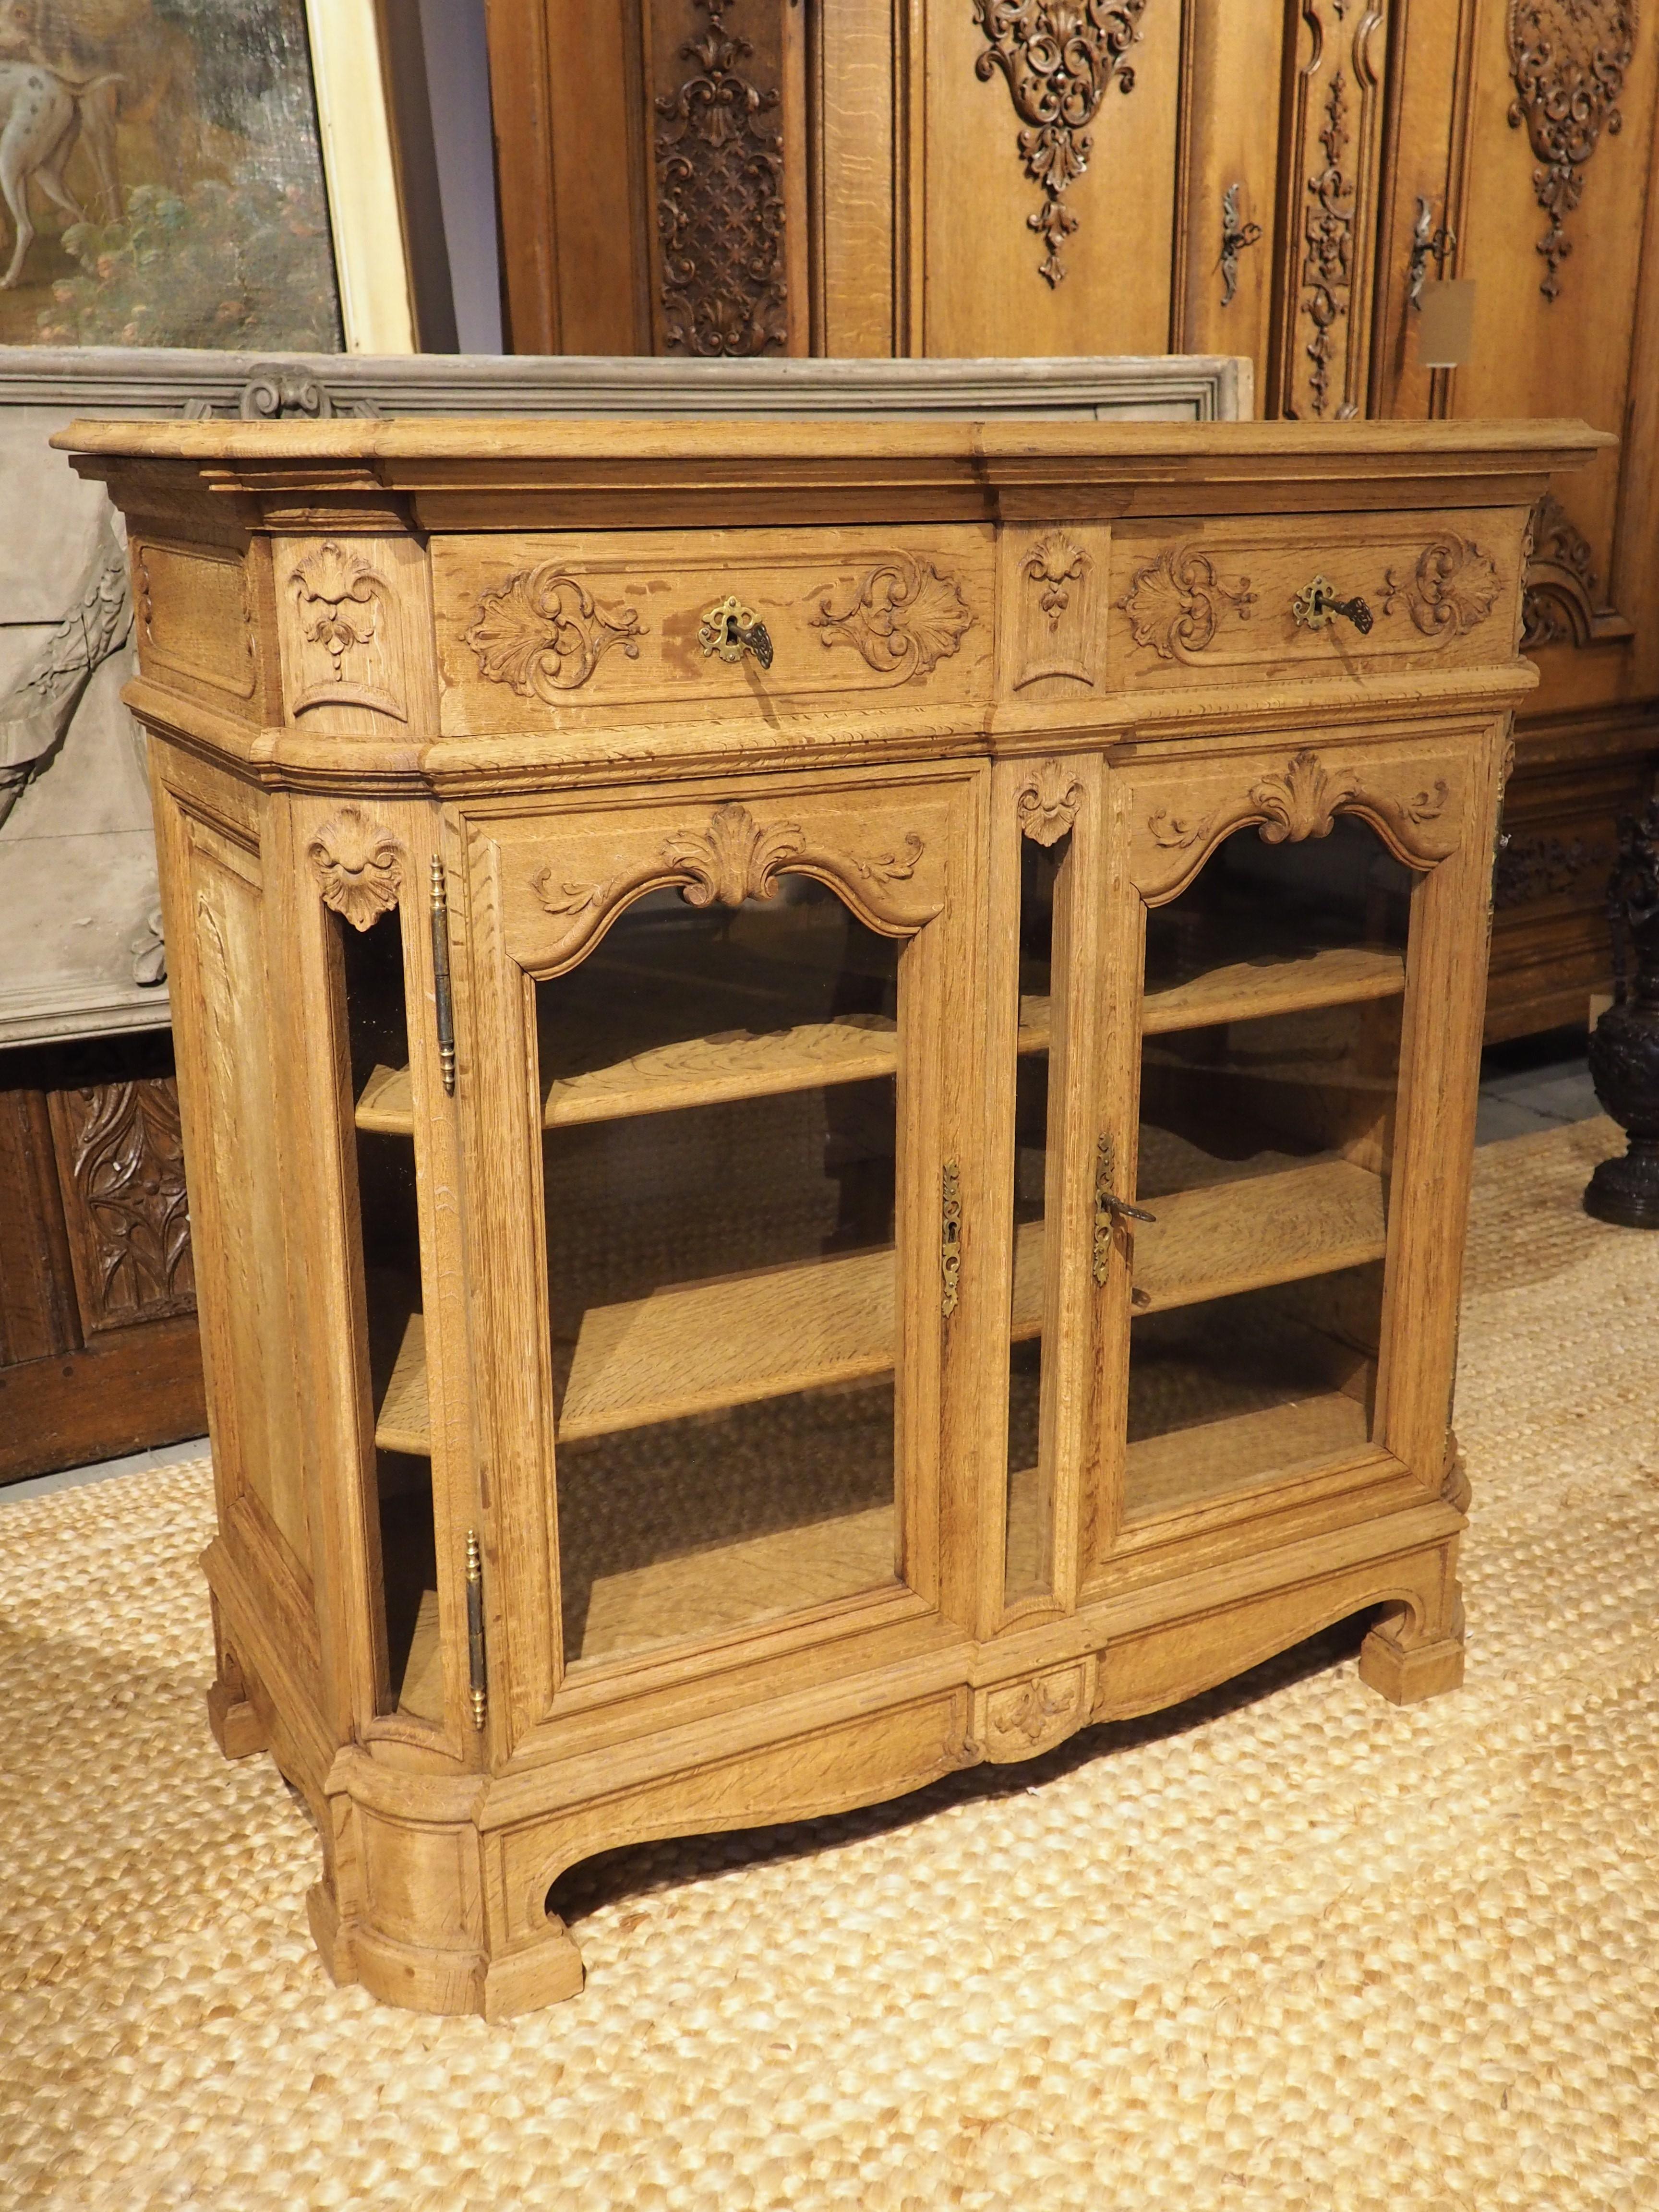 Featuring elements in the style of both Louis XIV and Louis XV, this buffet vitrine is from Liege, Belgium. Hand-carved circa 1900, the wood has been bleached more recently, giving the vitrine a light oak honey color with fascinating visible